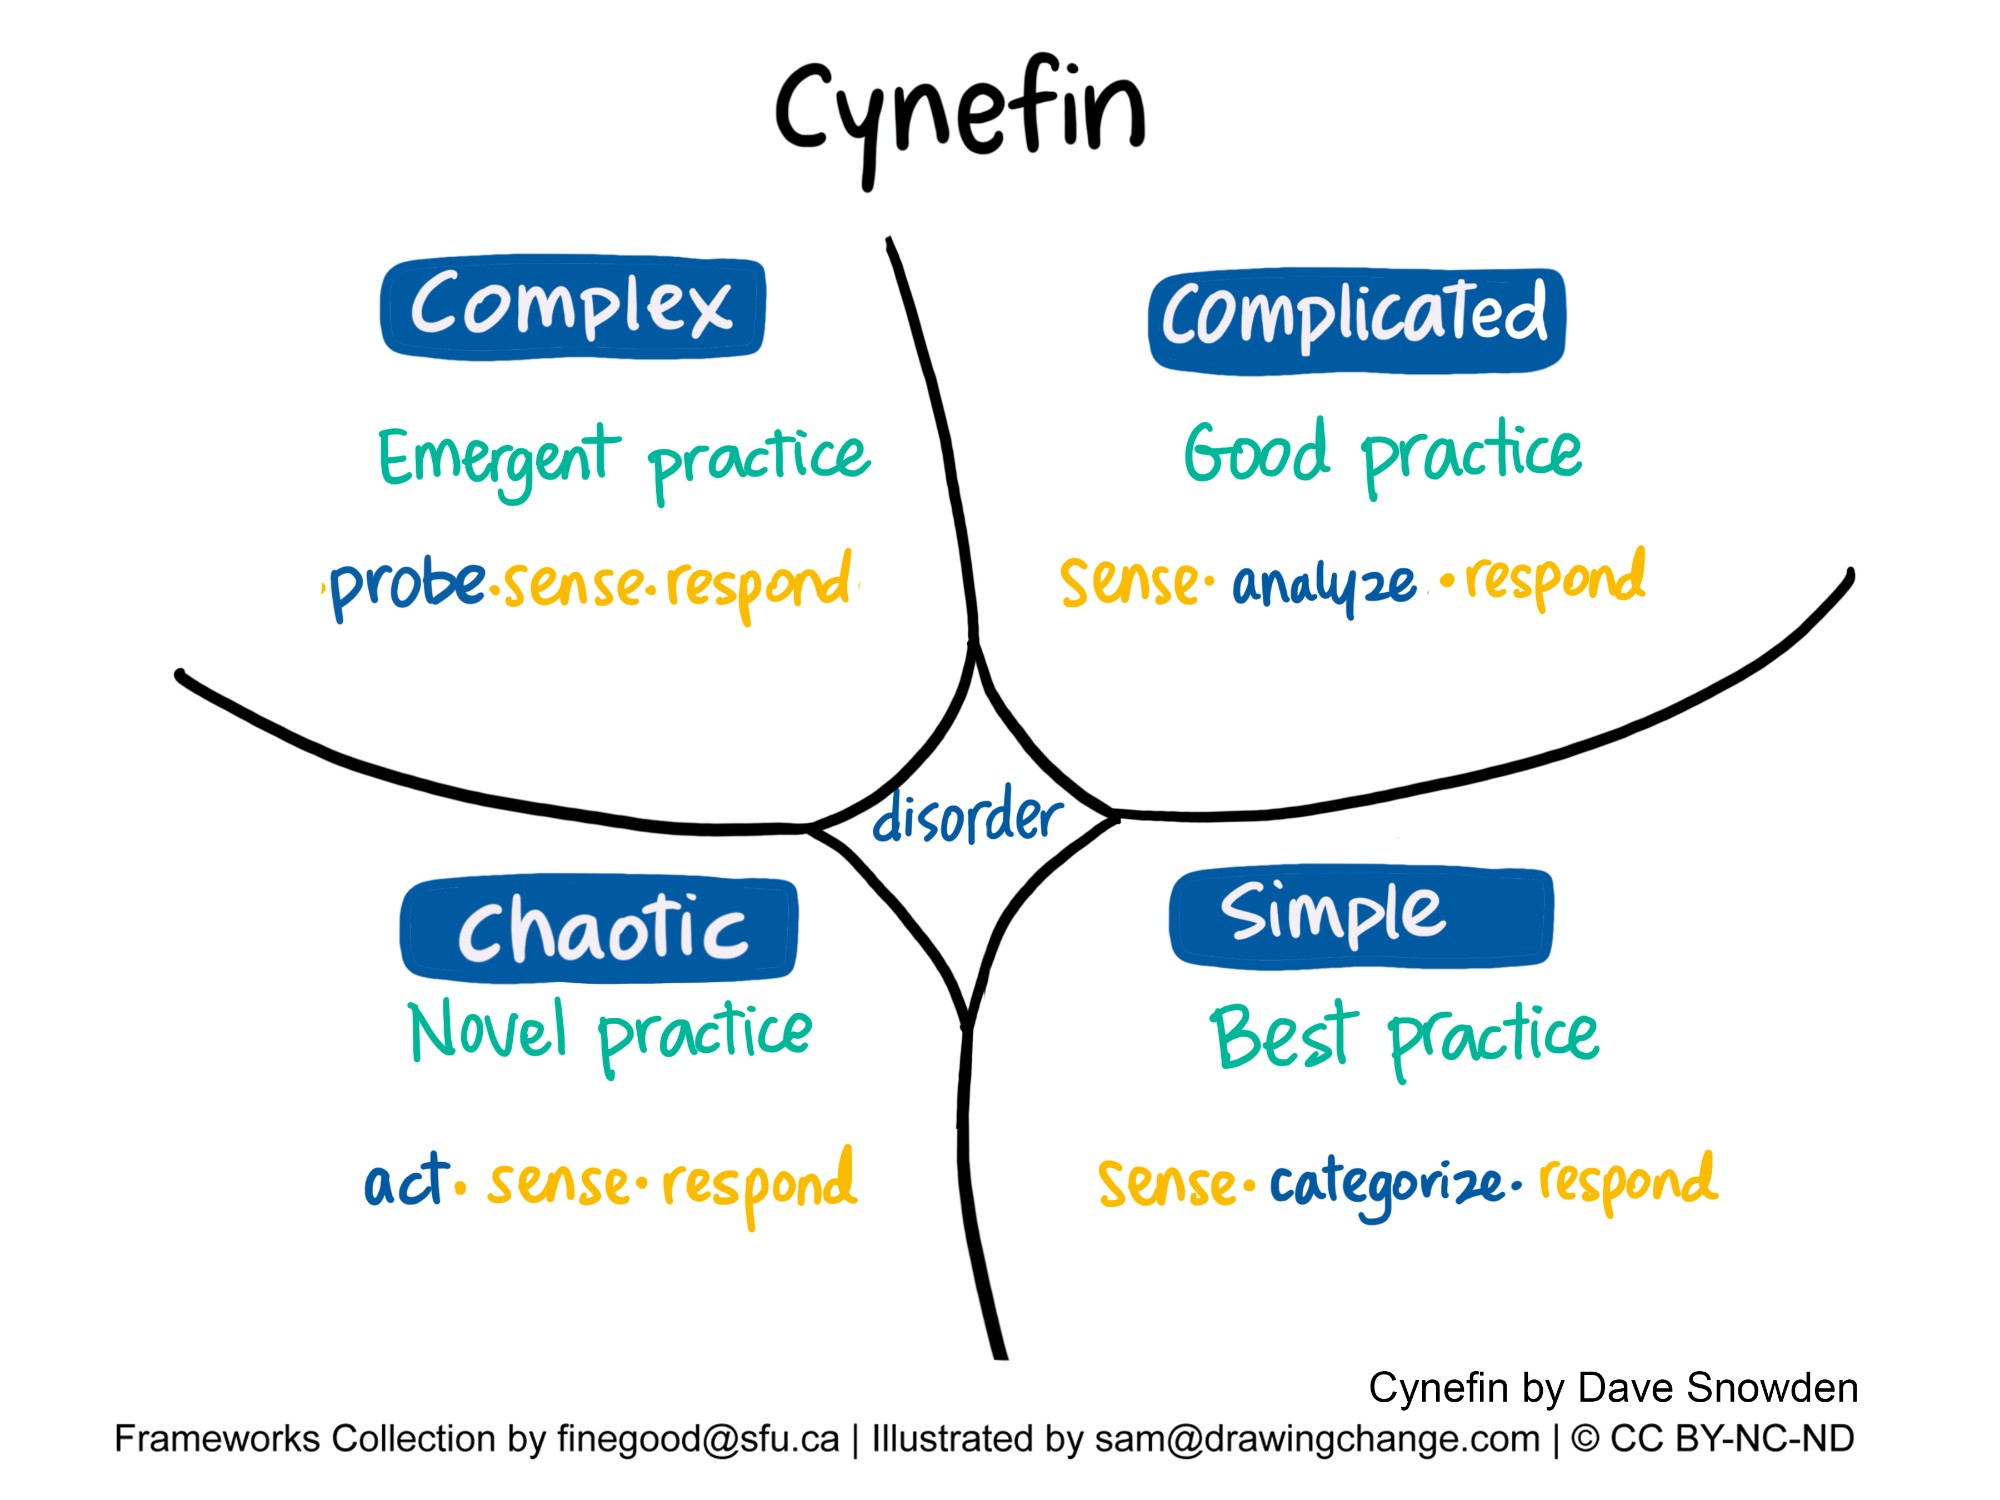 The image is a conceptual diagram of the Cynefin framework, showing four domains for decision-making, each with a suggested approach. The domains are denoted by quadrants connected to a central area labeled "disorder."  The bottom right is labeled "Simple" with the strategy "Best practice: sense, categorize, respond," implying that the situation is straightforward and a best practice can be easily applied.  The top right is labeled "Complicated" with the strategy "Good practice: sense, analyze, respond," which involves understanding through analysis before taking action.  The top left is labeled "Complex" with the strategy "Emergent practice: probe, sense, respond," suggesting a need to experiment and learn from the outcomes.  The bottom left is labeled "Chaotic," with the strategy "Novel practice: act, sense, respond," recommending immediate action to bring order.  The framework was developed by Dave Snowden, and the image includes attributions to the Frameworks Collection by finegood@sfu.ca and illustrations by sam@drawingchange.com, along with a CC BY-NC-ND Creative Commons license notice.